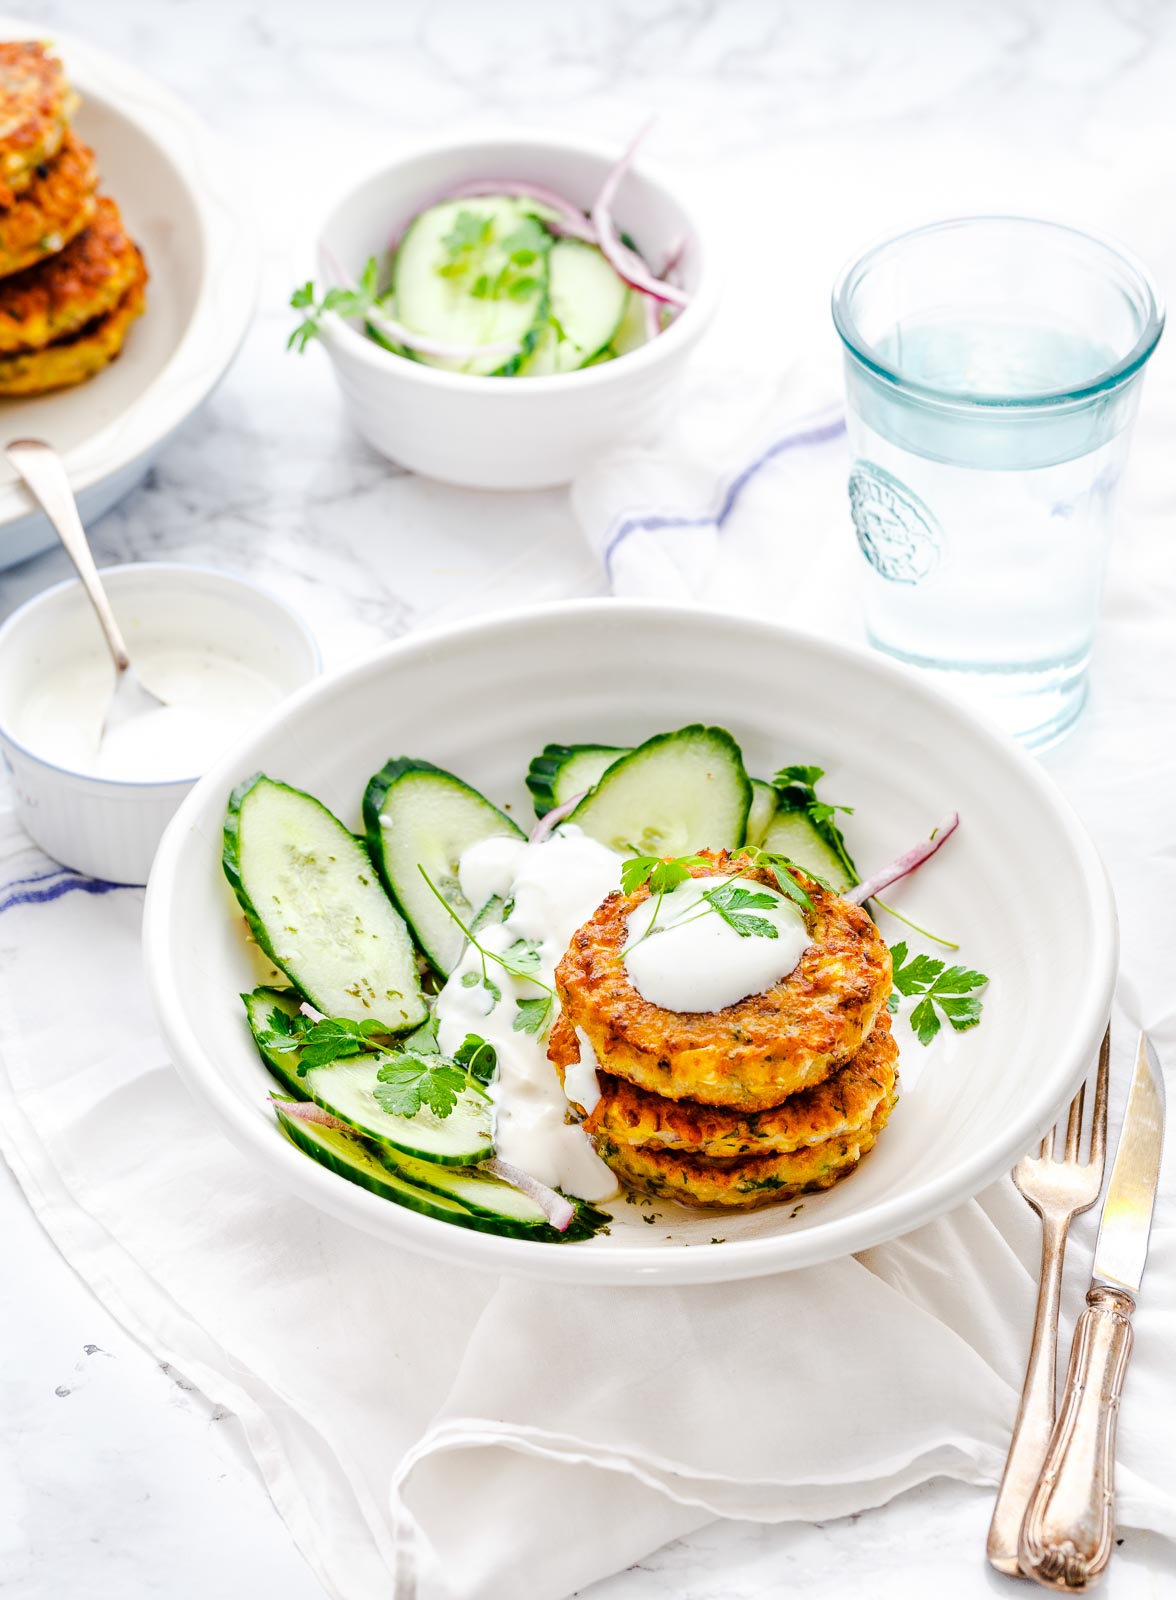 Corn fritters in a white plate, with a cucumber salad, and yogurt sauce.